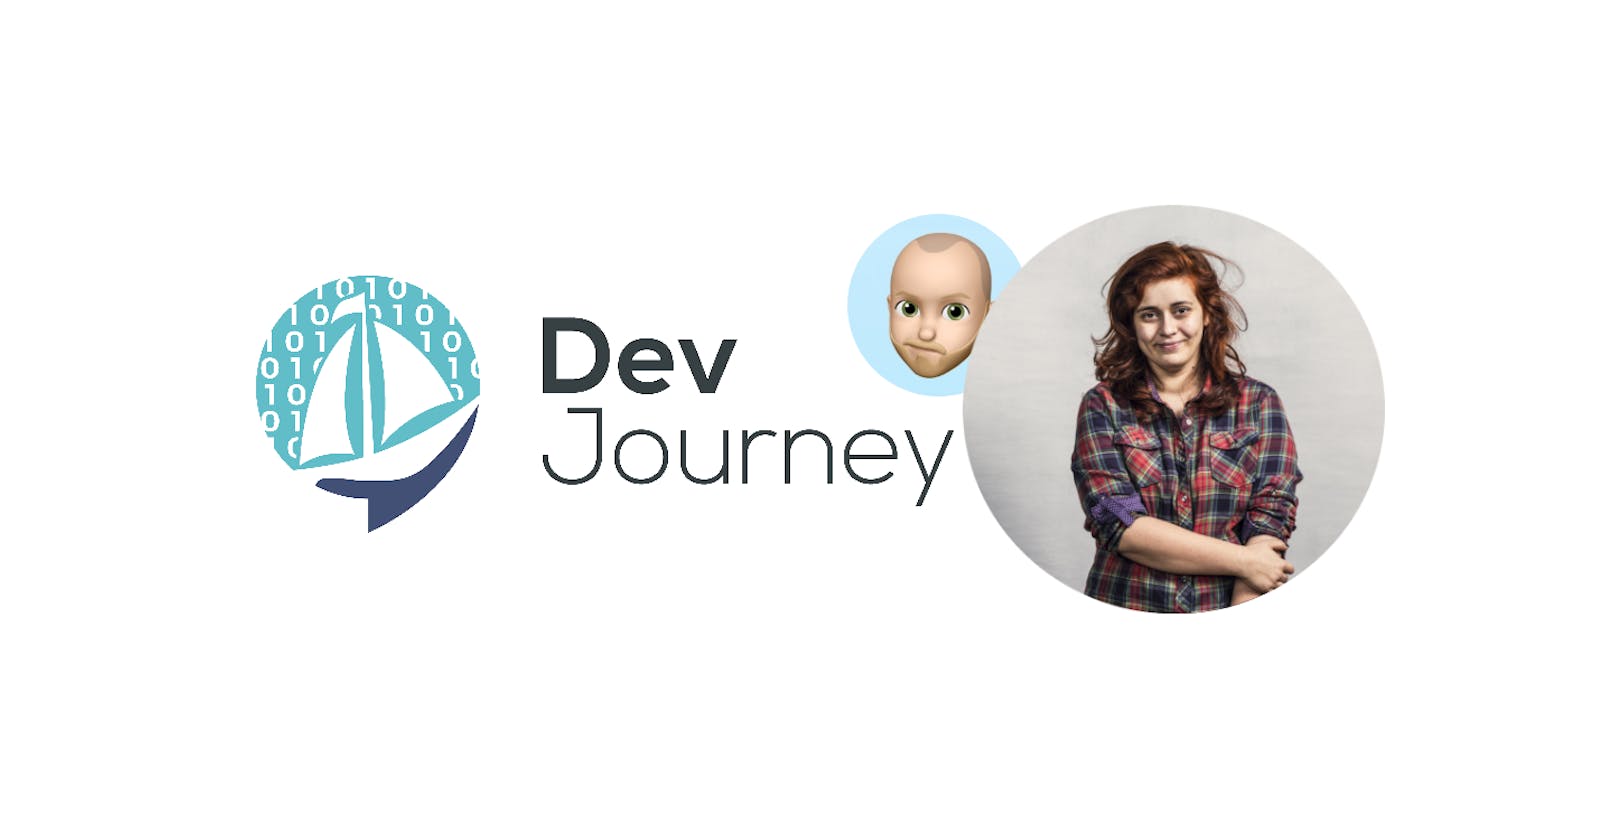 Sara Vieira is opinionated per design... and other things I learned recording her DevJourney